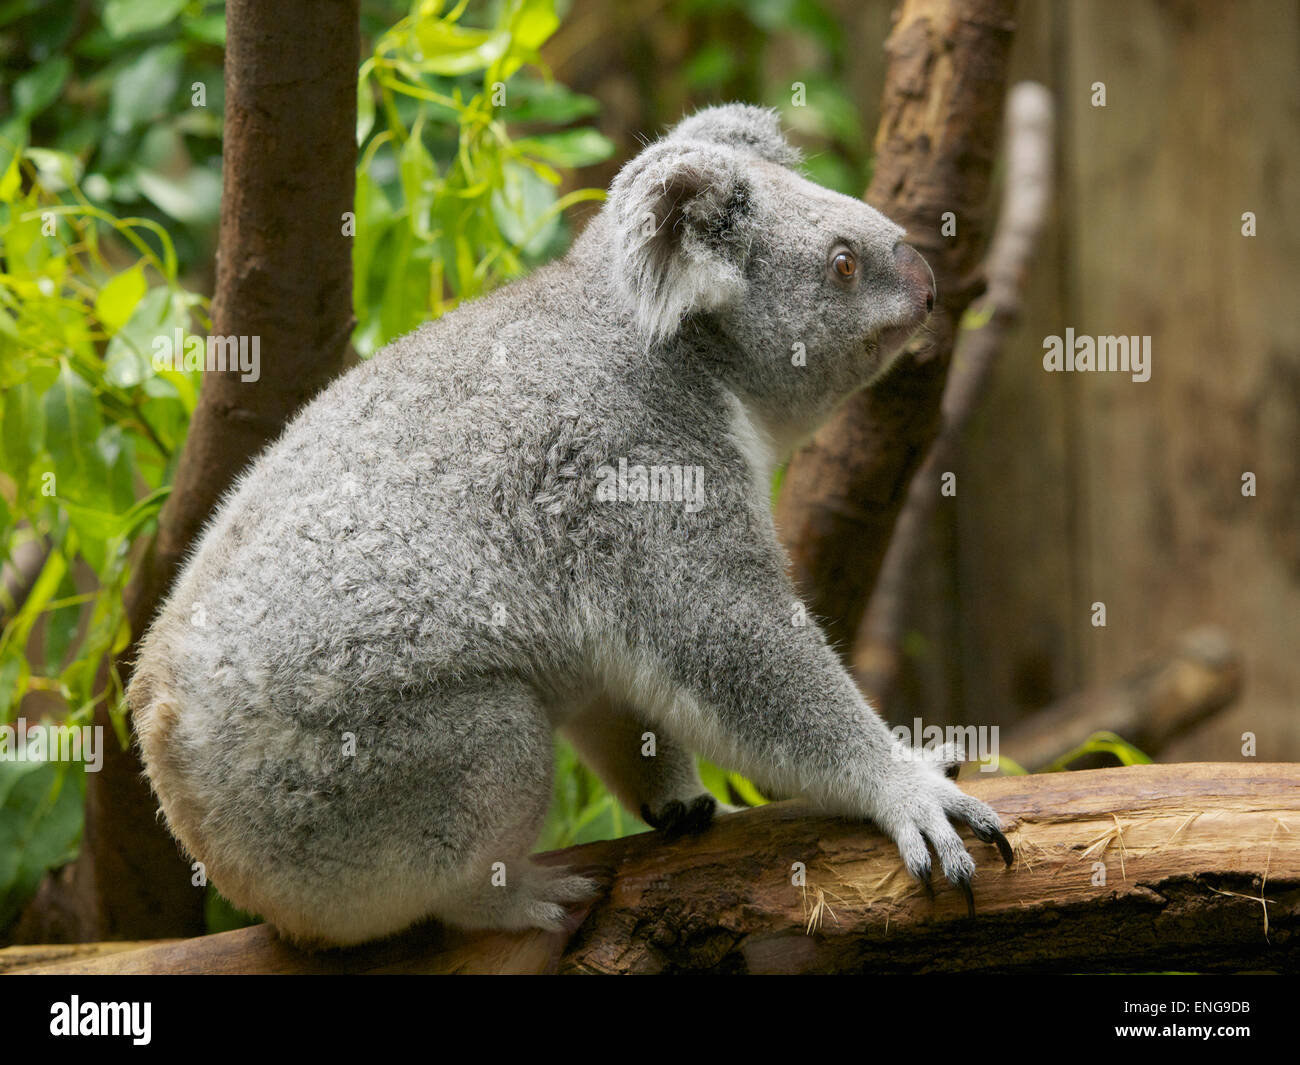 Koala in the Duisburg Zoo, Germany. There only are about 140 koalas outside of Australia, mainly because of their specific diet. Stock Photo